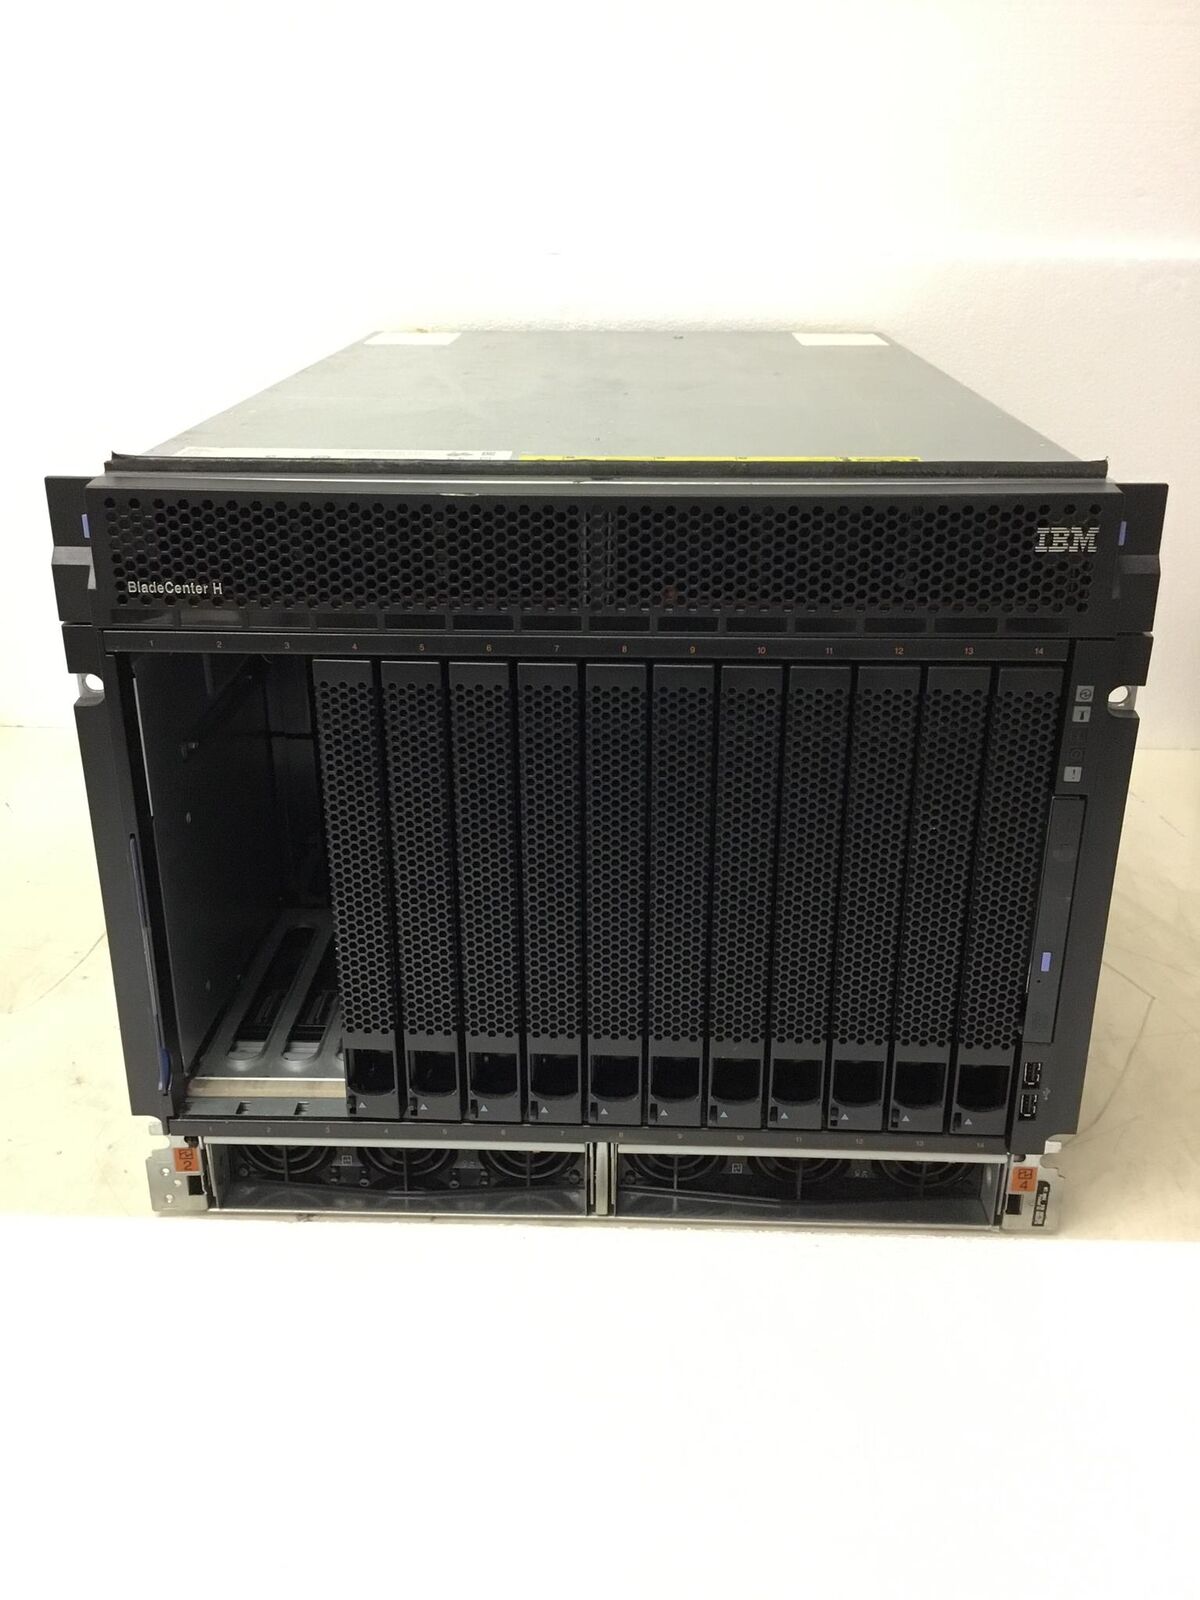 IBM Blade Center H8852 HC1 Server Chassis With DVD-RW  Great Deal